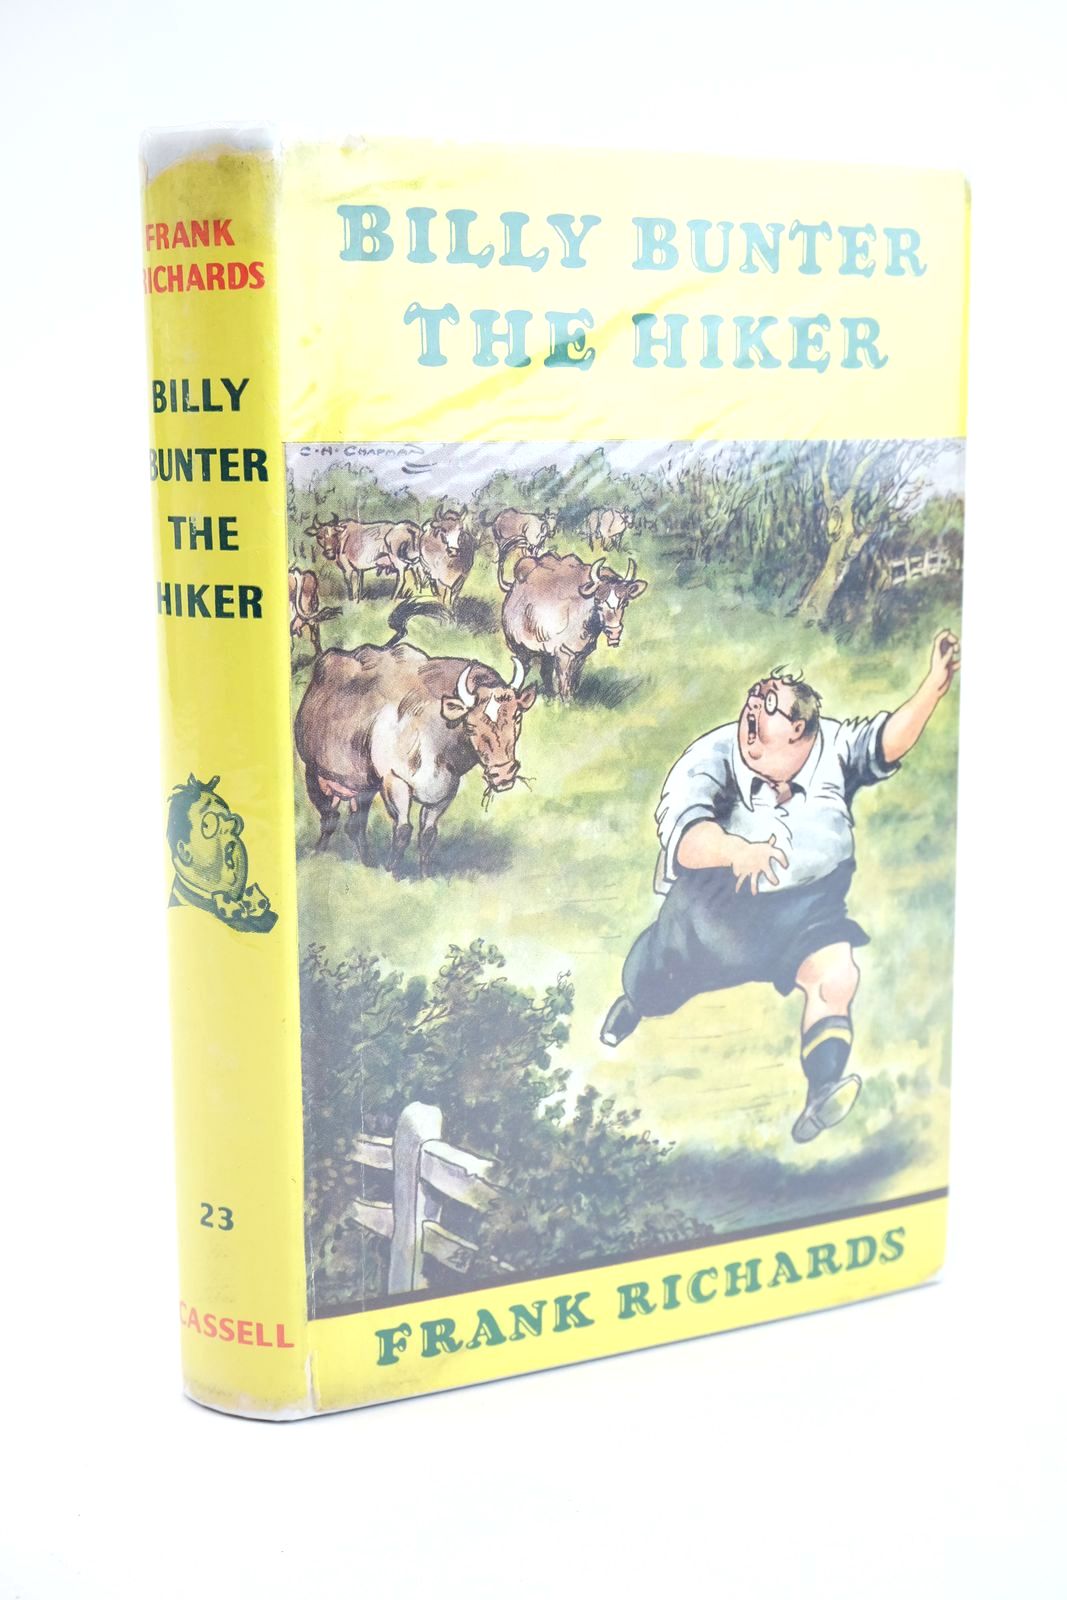 Photo of BILLY BUNTER THE HIKER written by Richards, Frank illustrated by Chapman, C.H. published by Cassell &amp; Co. Ltd. (STOCK CODE: 1323763)  for sale by Stella & Rose's Books